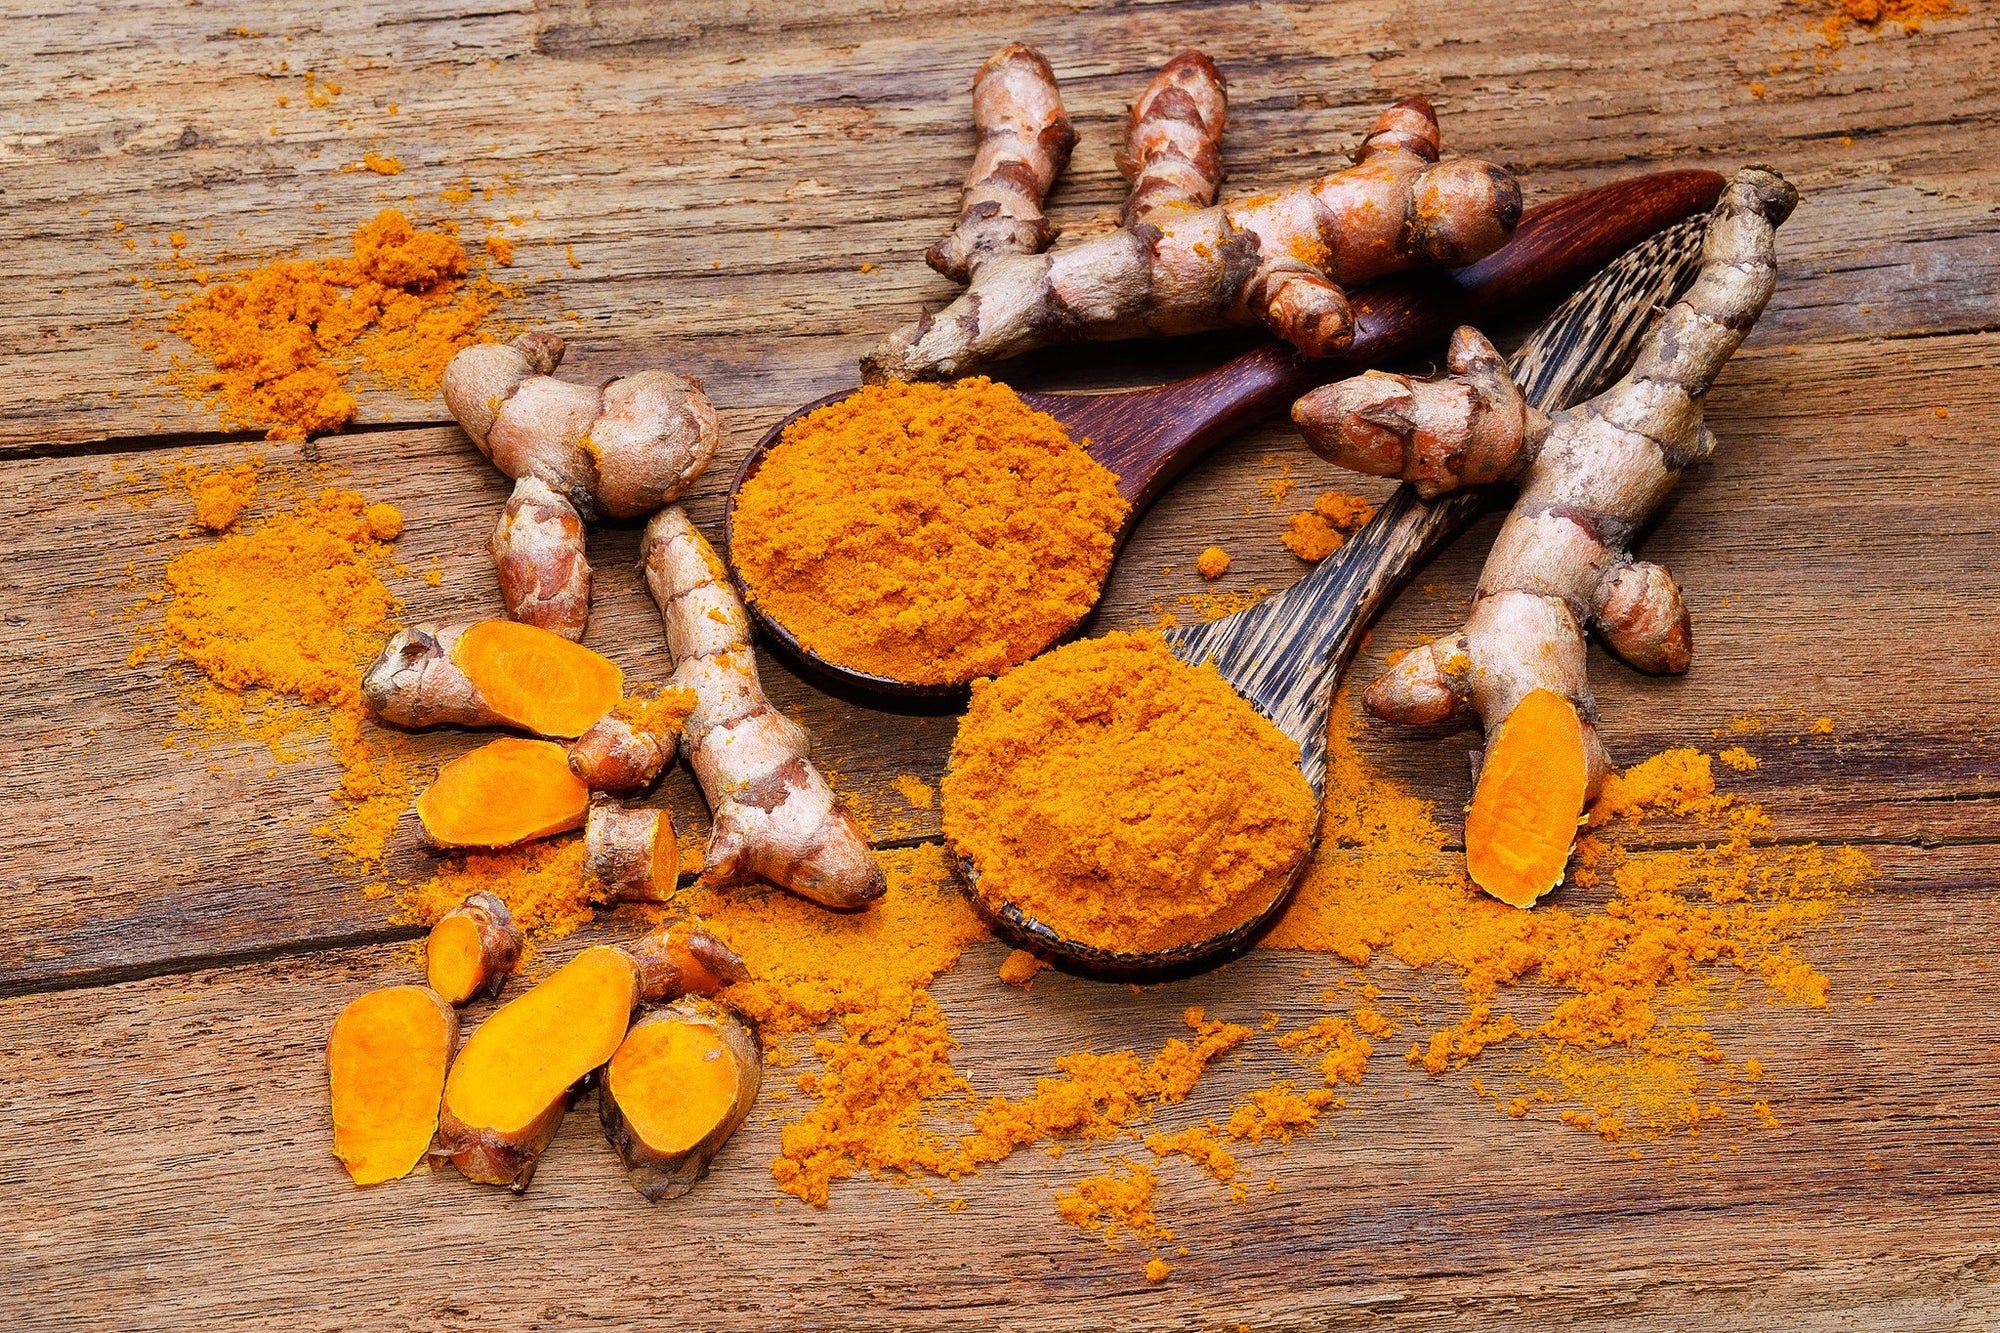 10,818 Reasons Big Pharma Doesn’t Want You to Know About a Healing Spice Called Turmeric